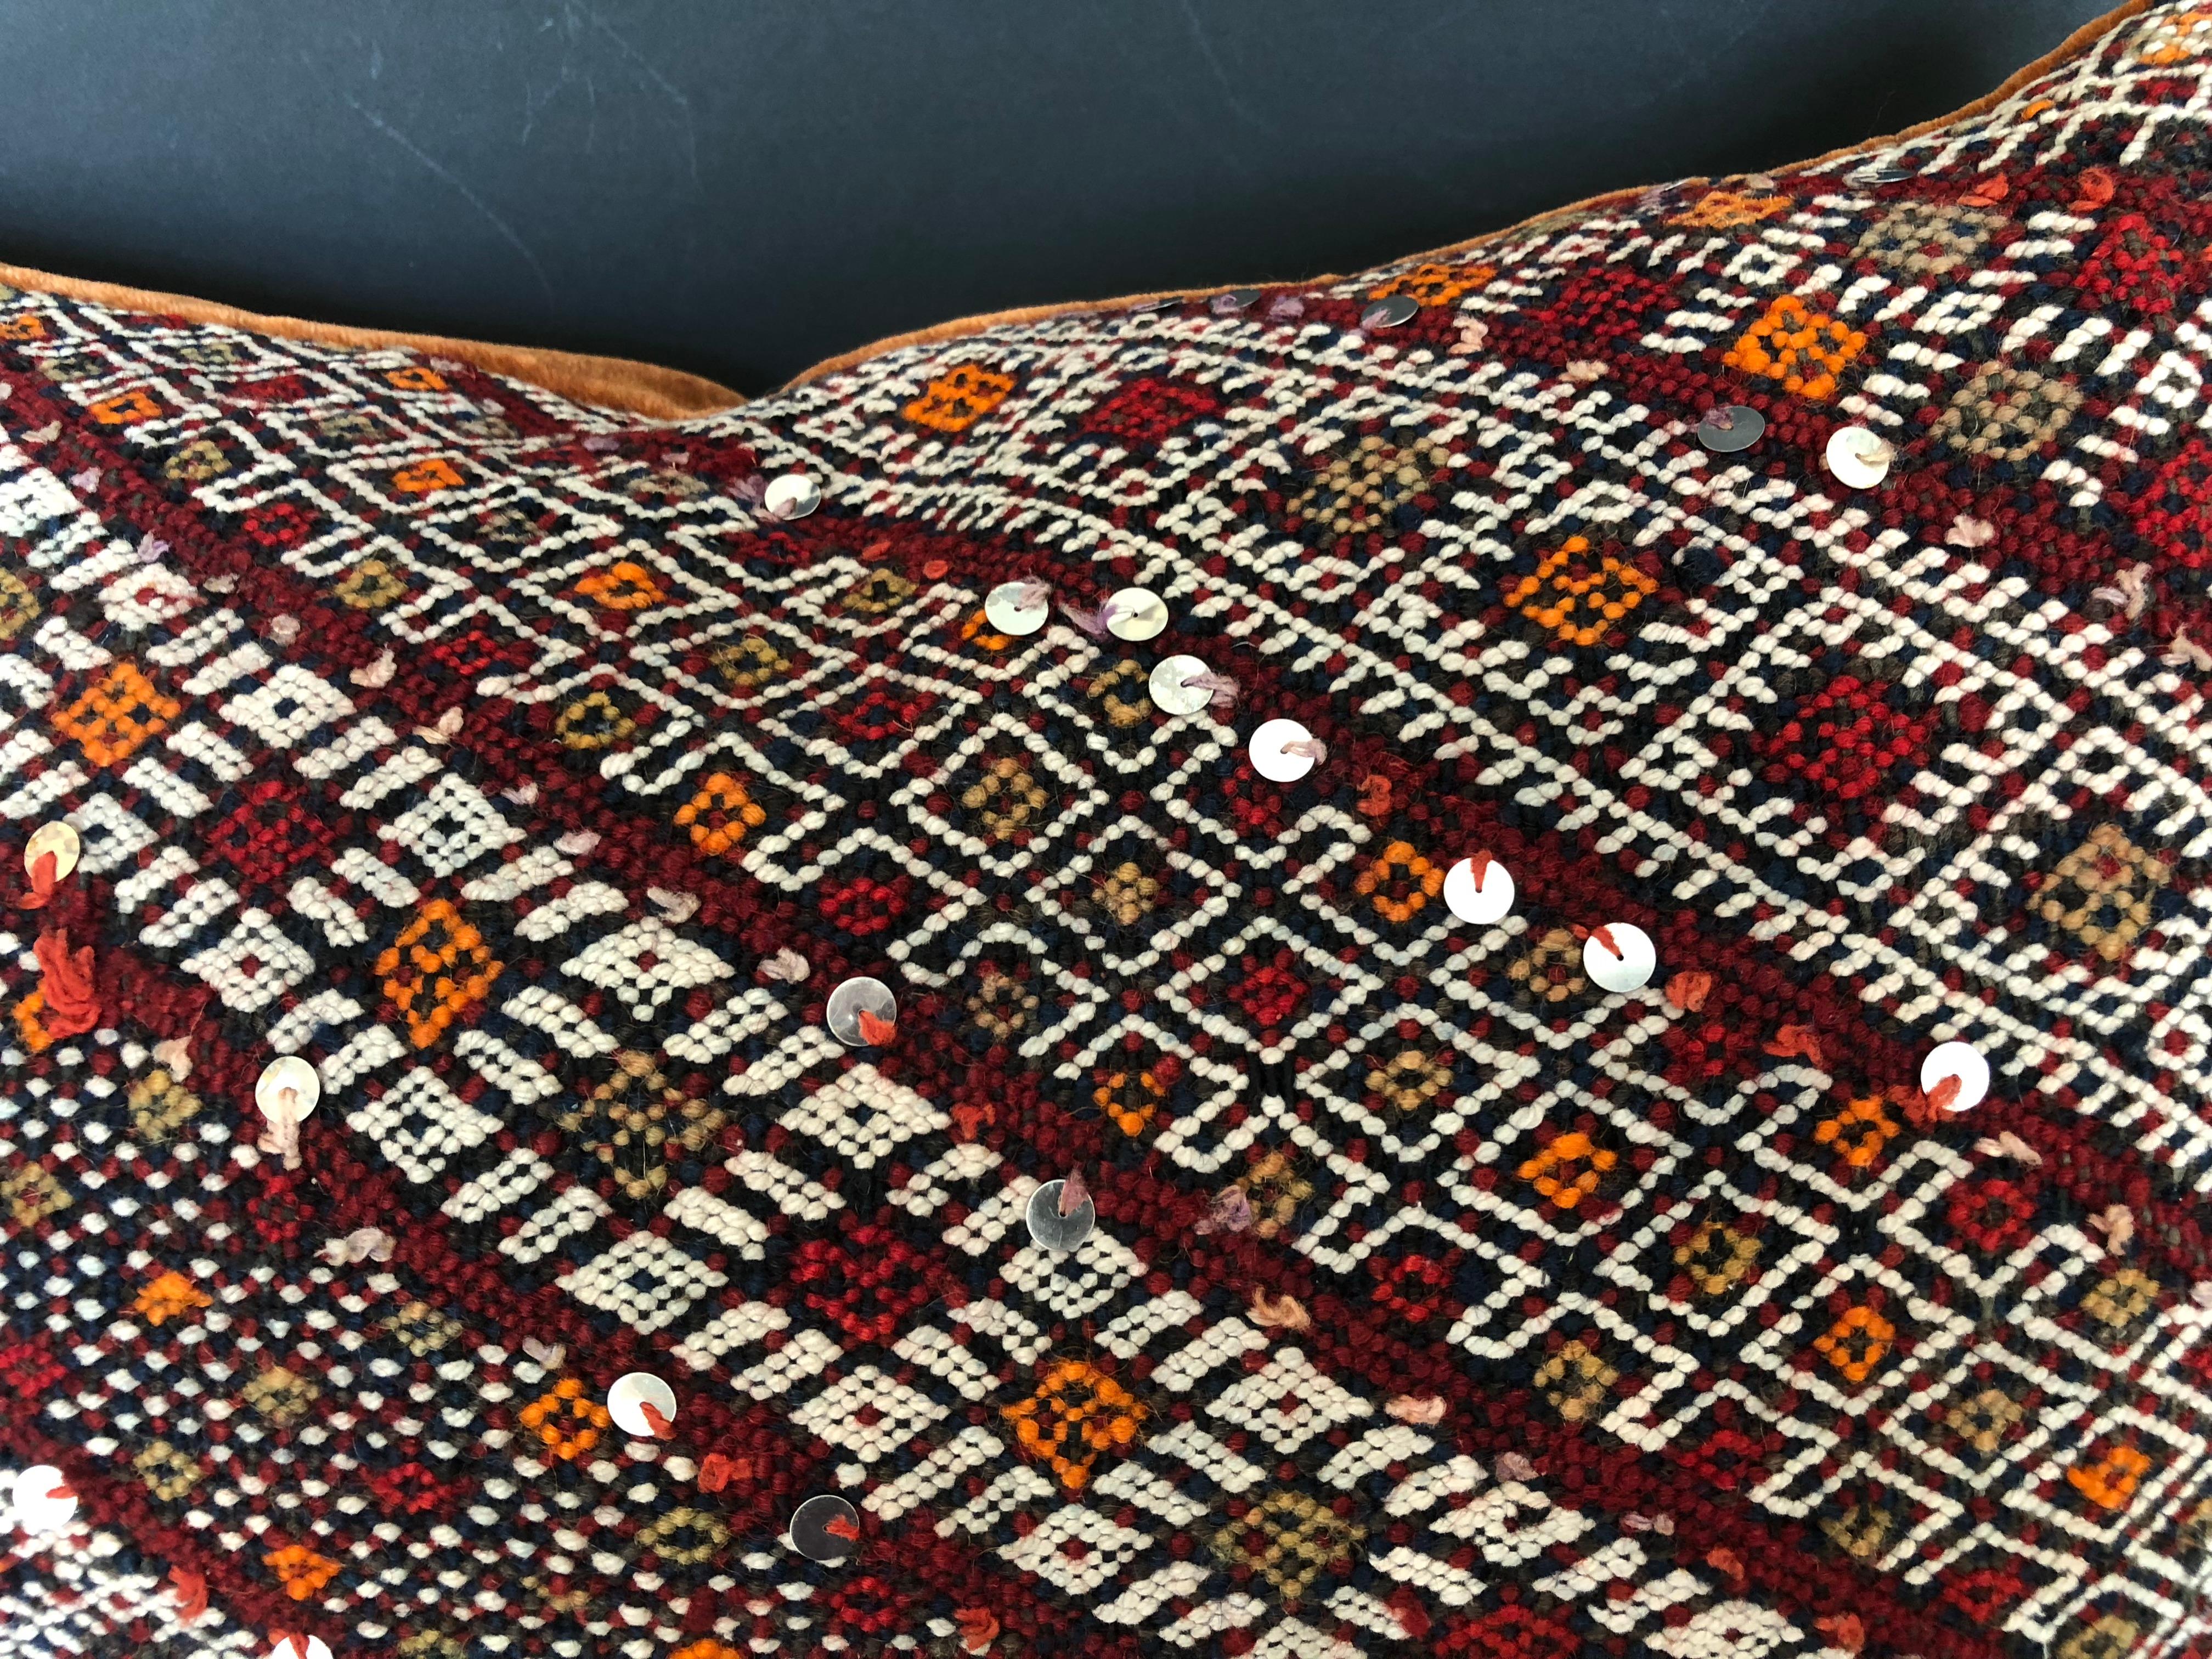 Custom pillow cut from a vintage hand loomed wool Moroccan rug from the Atlas Mountains. Tribal designs are embellished with sequins. Pillow is backed in a deep cinnamon mohair, filled with an insert of 50/50 down and feathers and hand sewn closed.